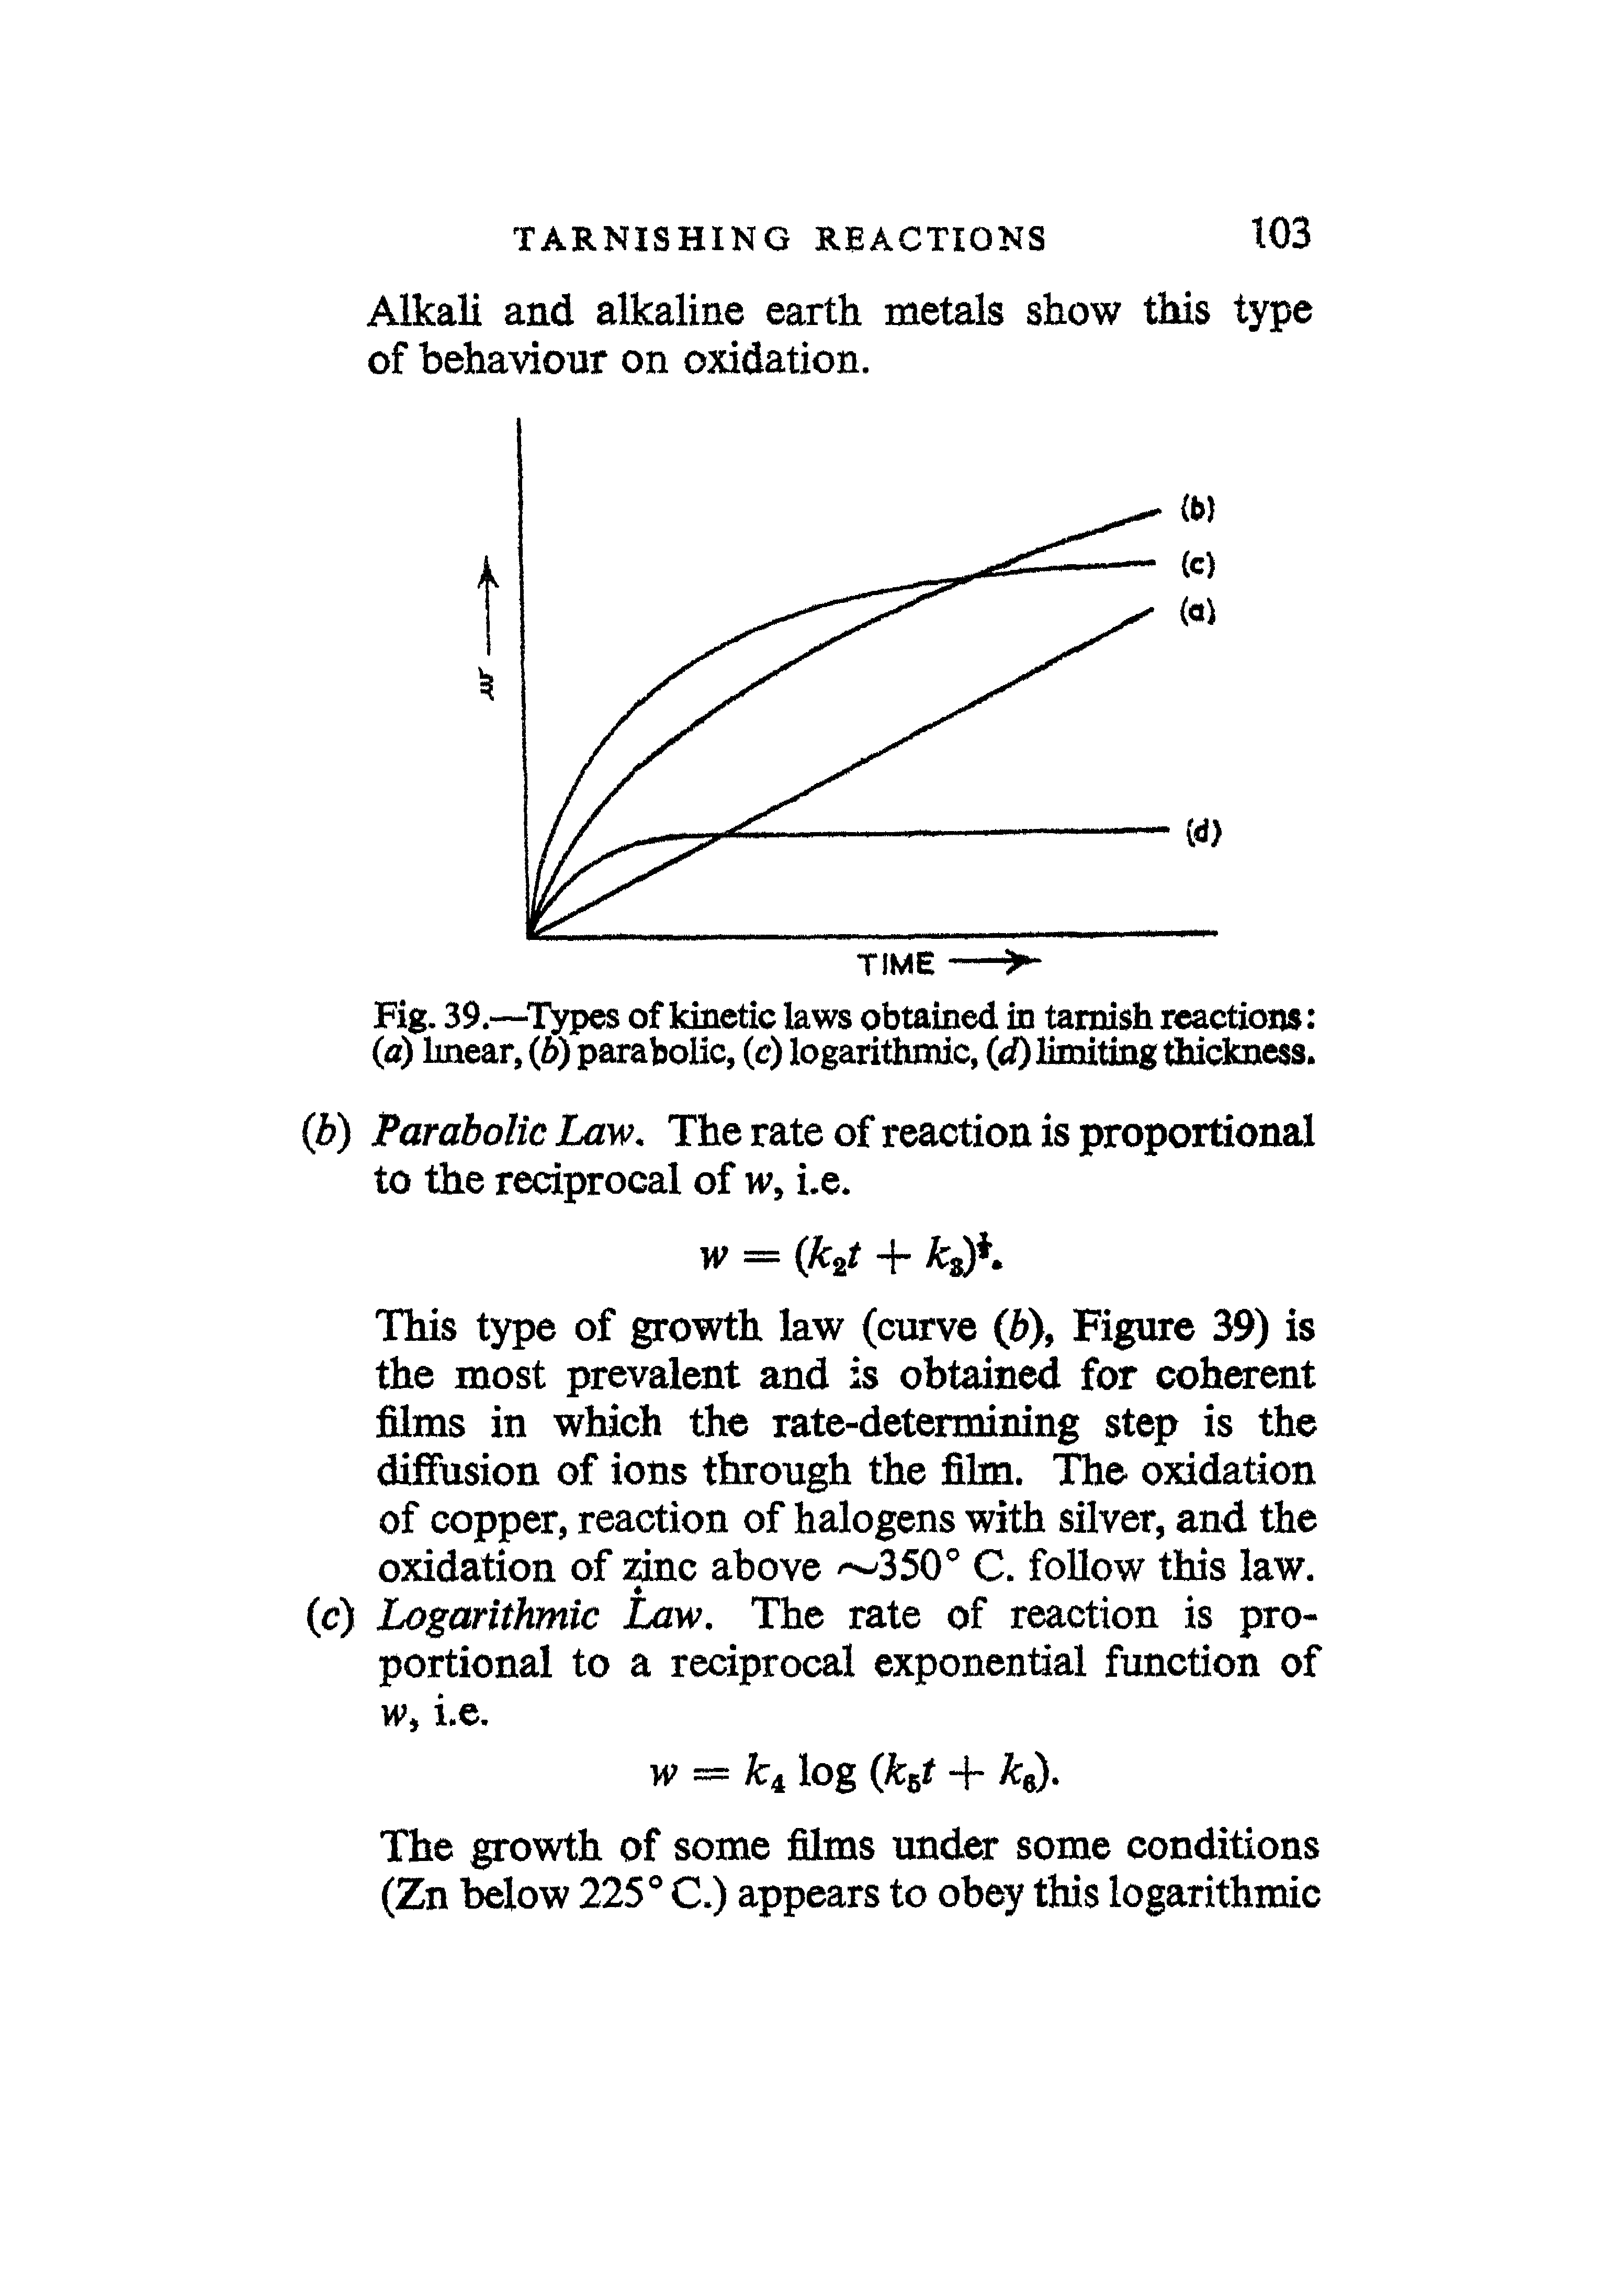 Fig. 39.— Types of kinetic laws obtained in tarnish reactions (a) linear, (6) parabolic, (c) logarithmic, (d) limiting thickness.